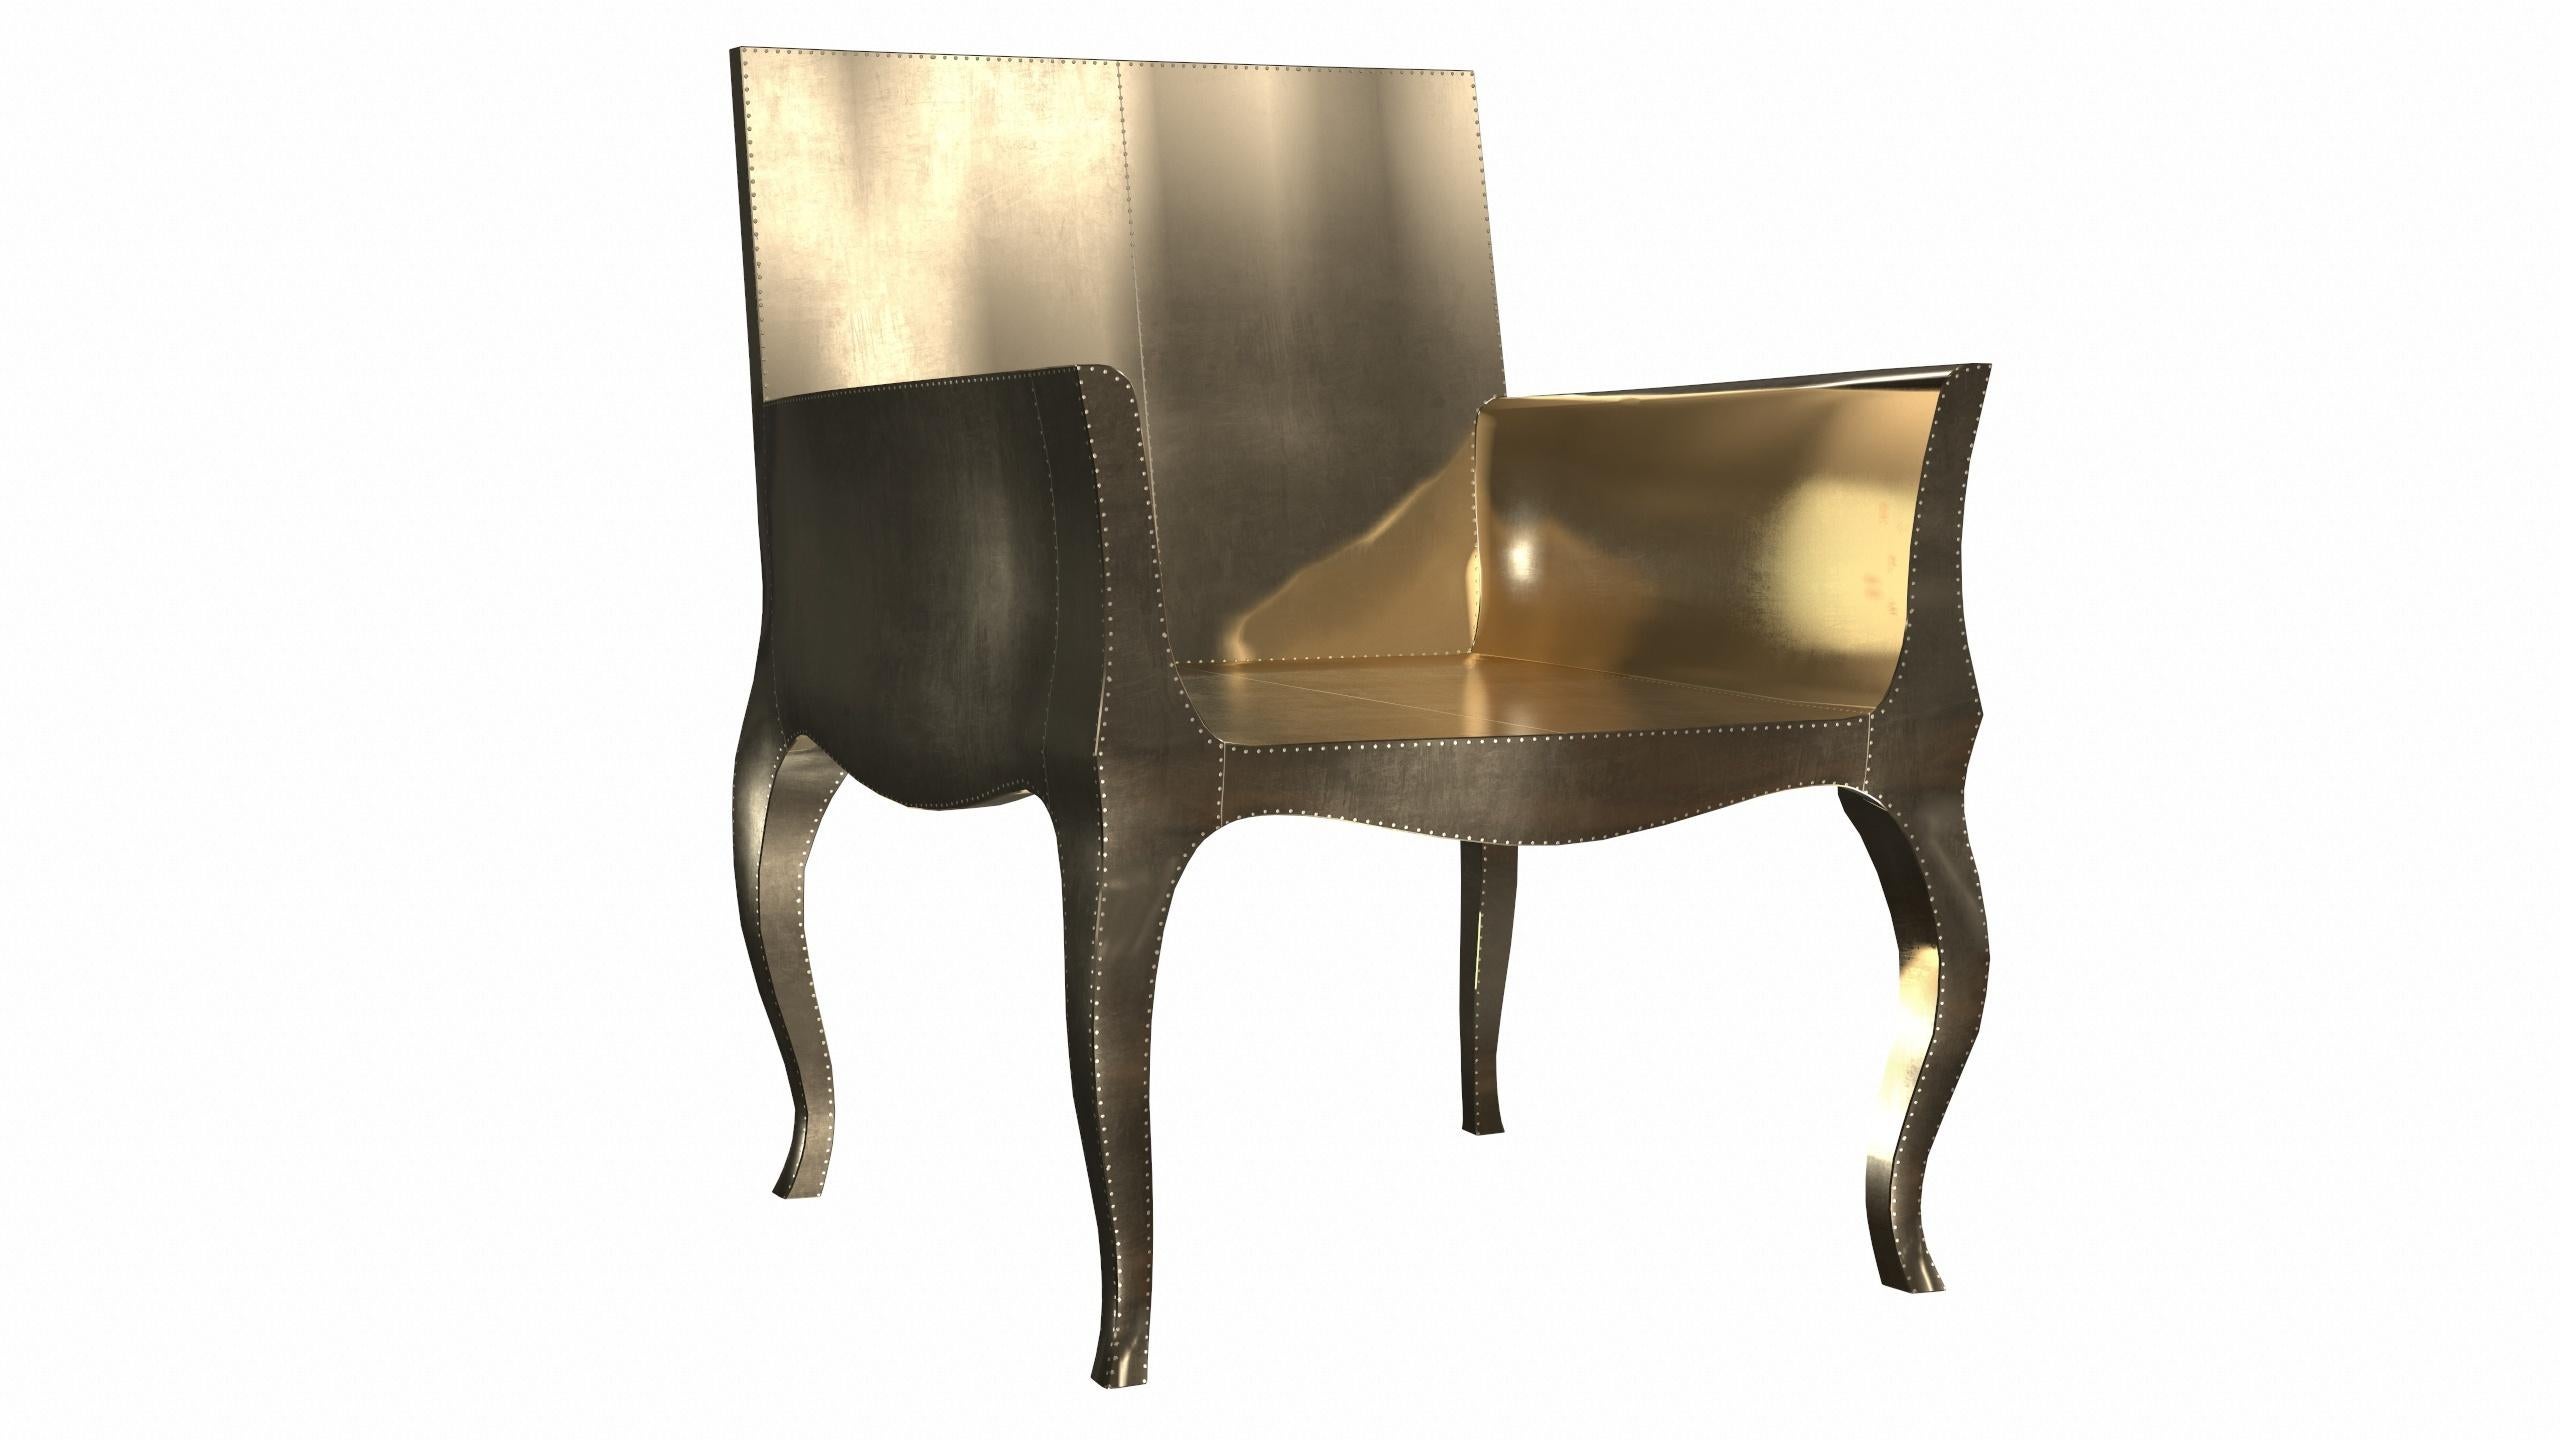 Art Deco Dining Room Chairs in Smooth Brass by Paul Mathieu for S. Odegard In New Condition For Sale In New York, NY